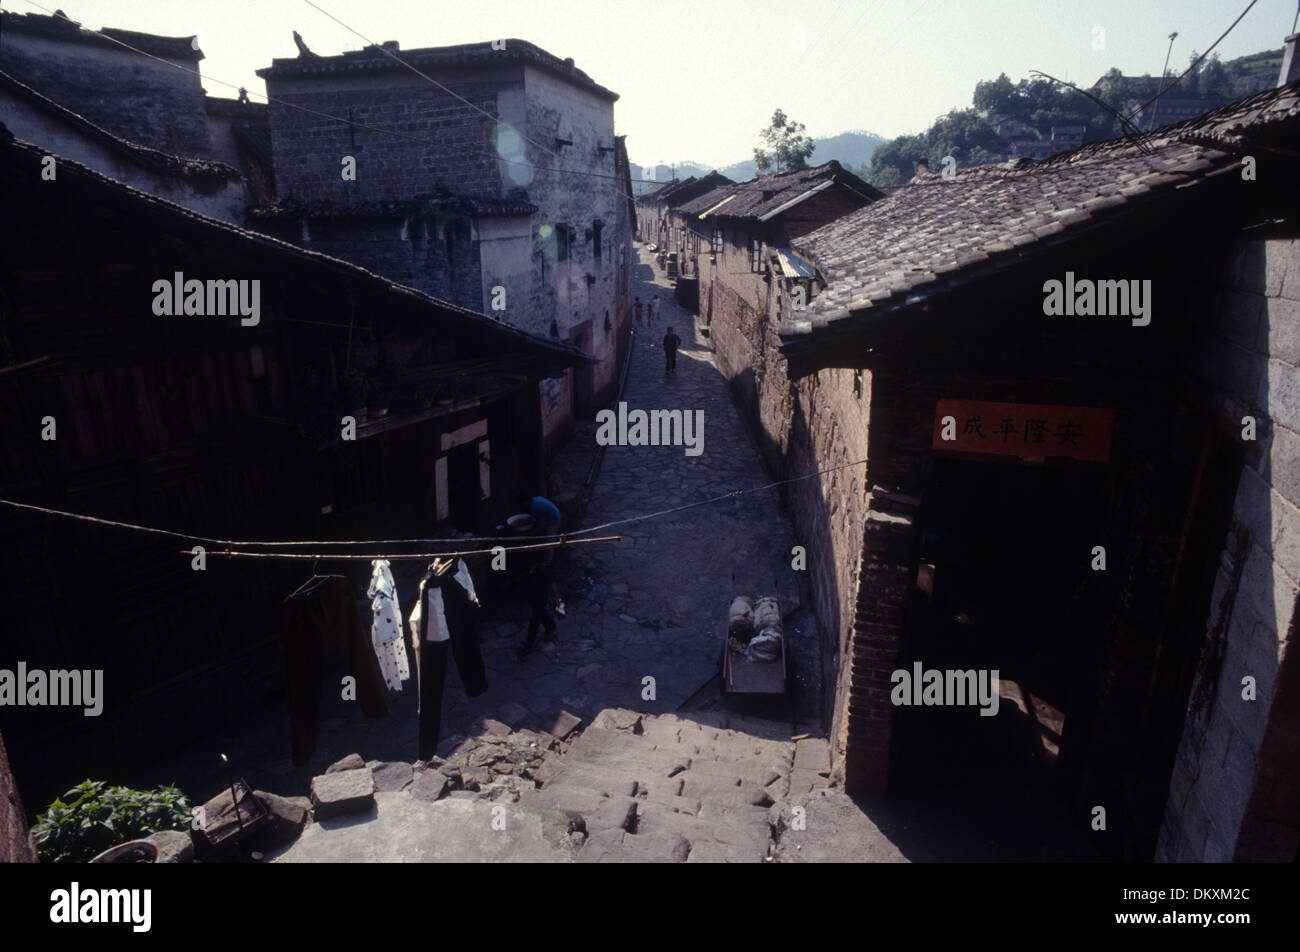 One of the main street in Fenghuang ancient town, Hunan Province, China Stock Photo